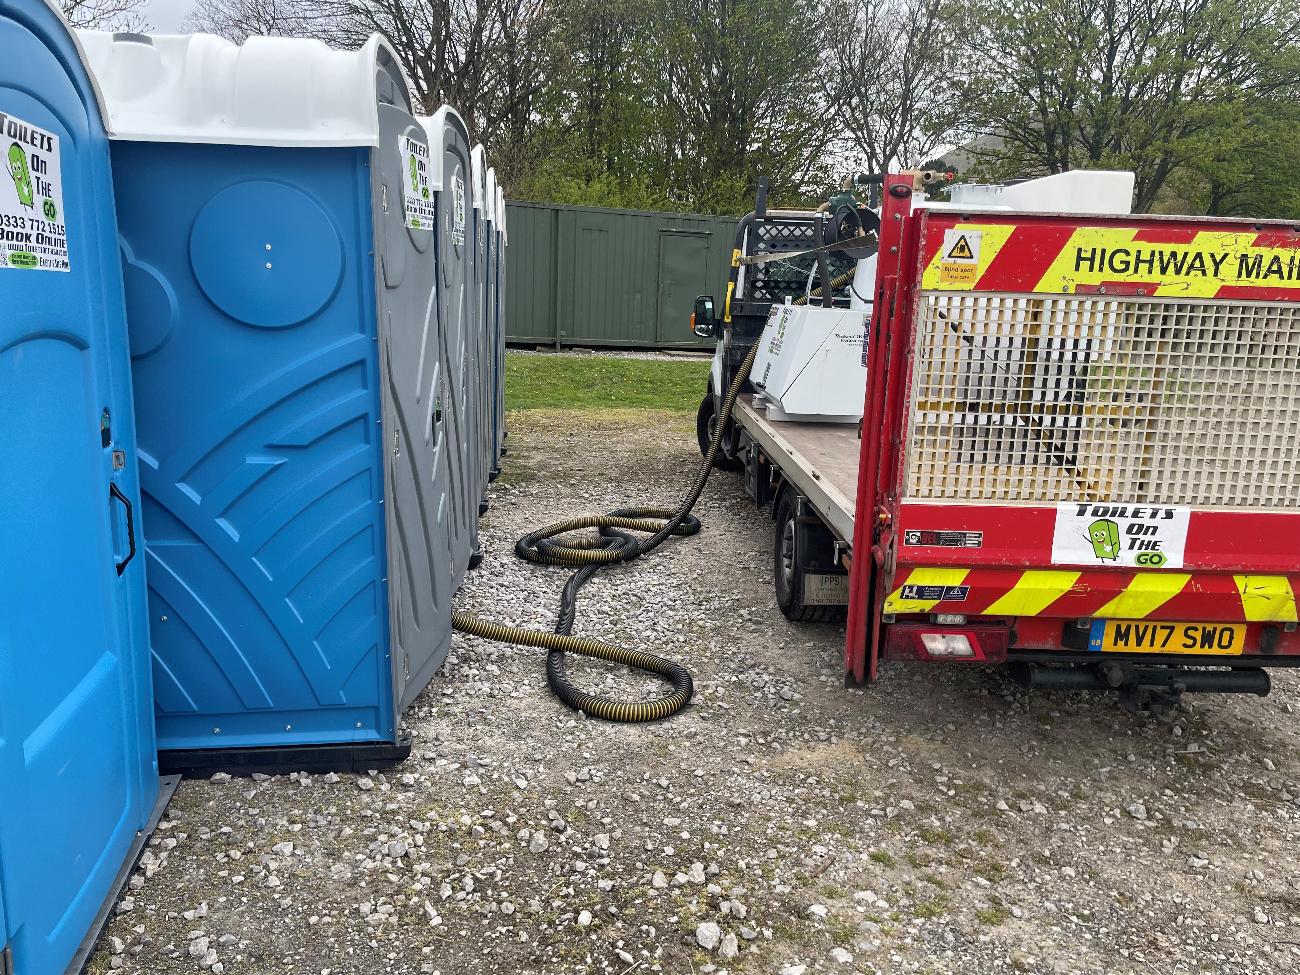 Gallery | Portable Toilet Loo Hire Rental Company in North West uk and Manchester gallery image 30